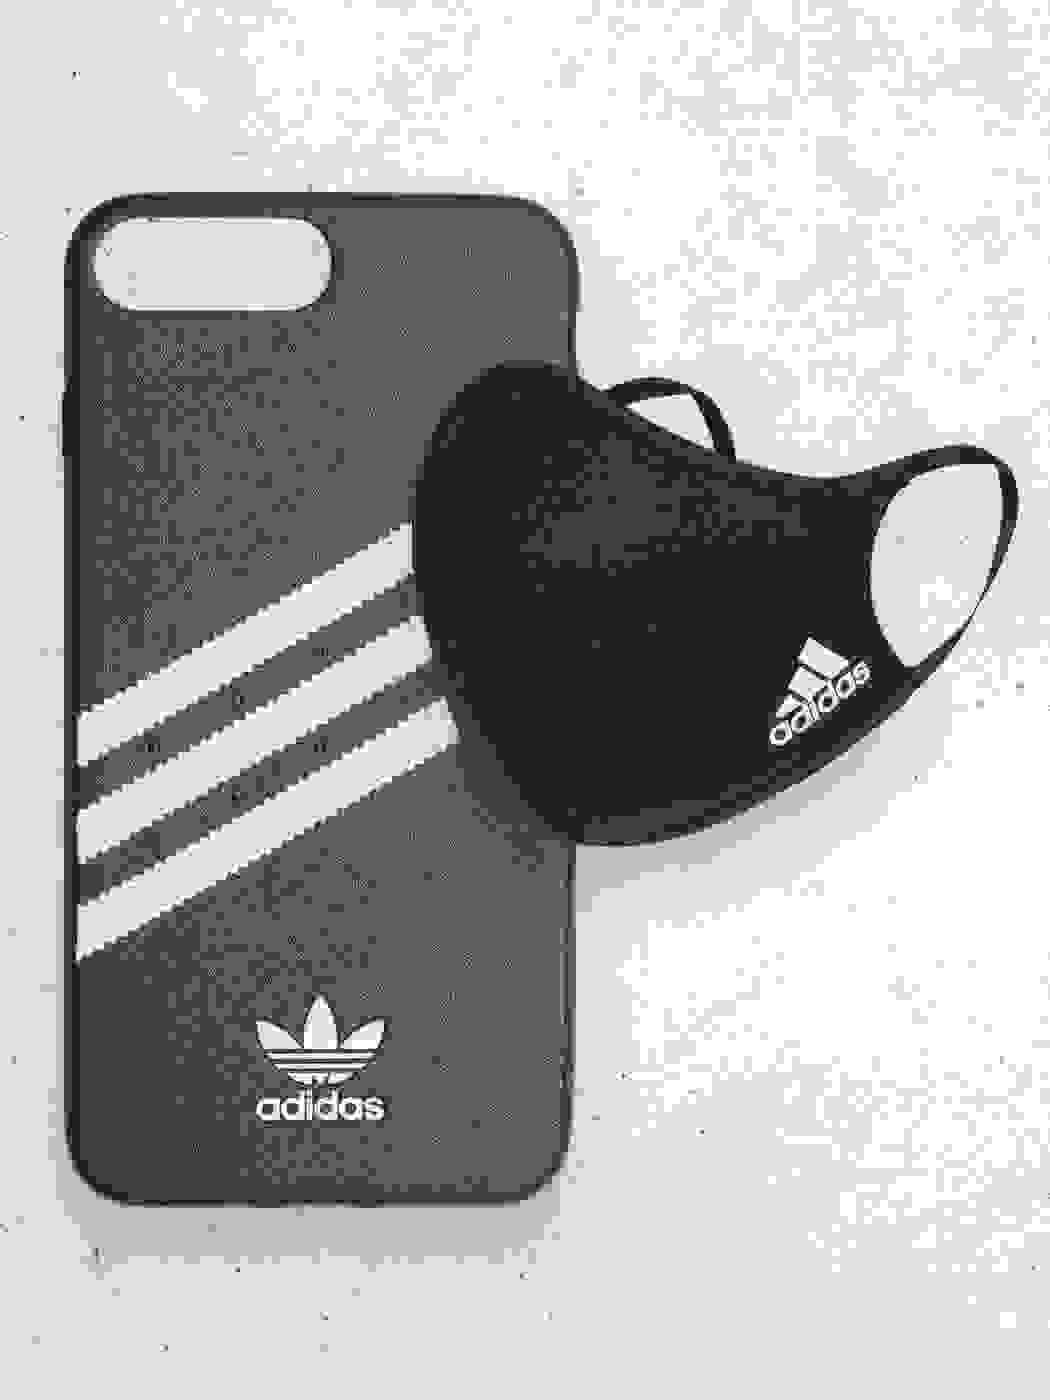 adidas store ufficiale